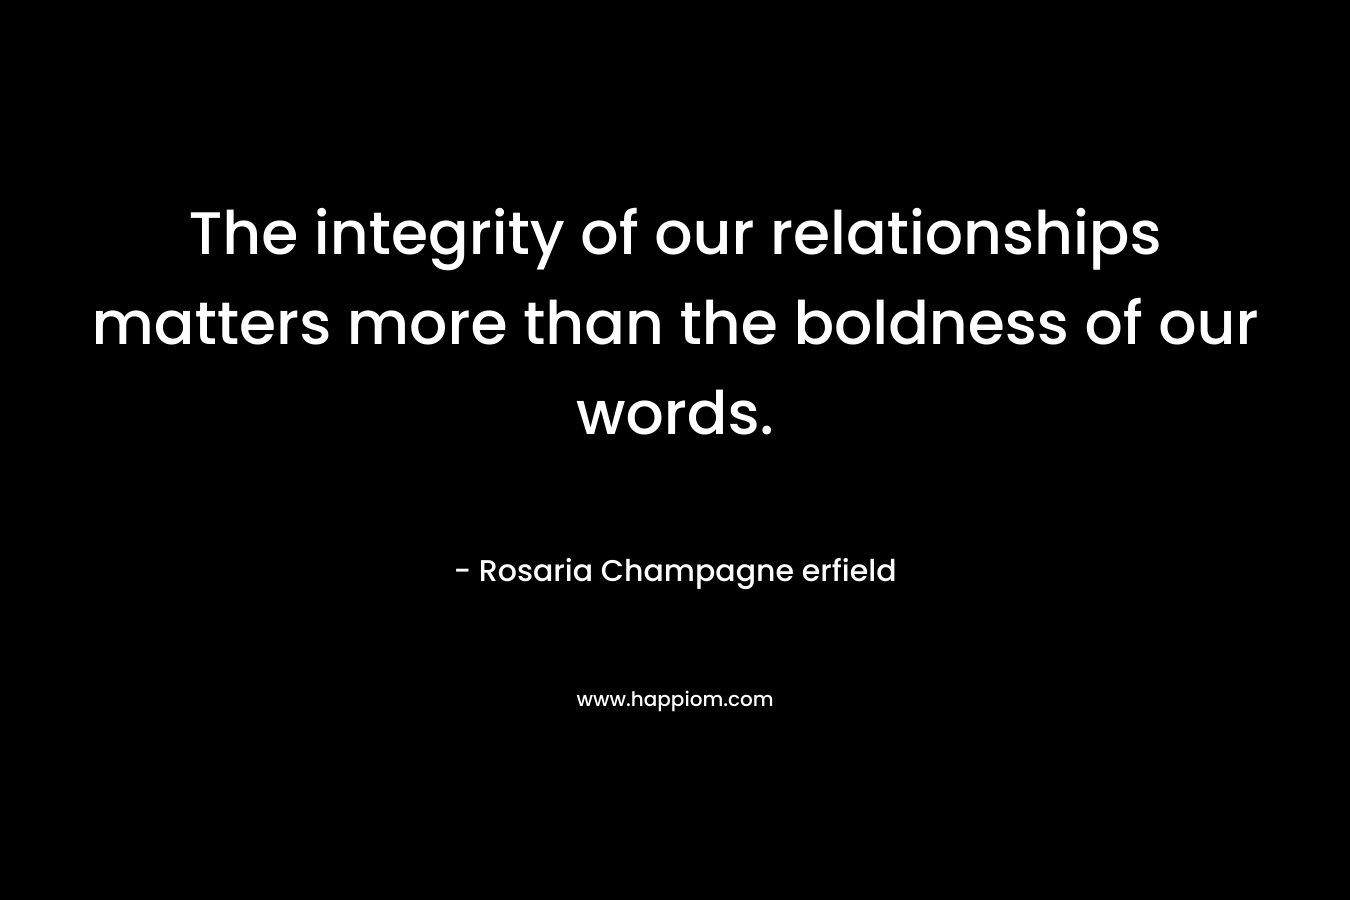 The integrity of our relationships matters more than the boldness of our words.